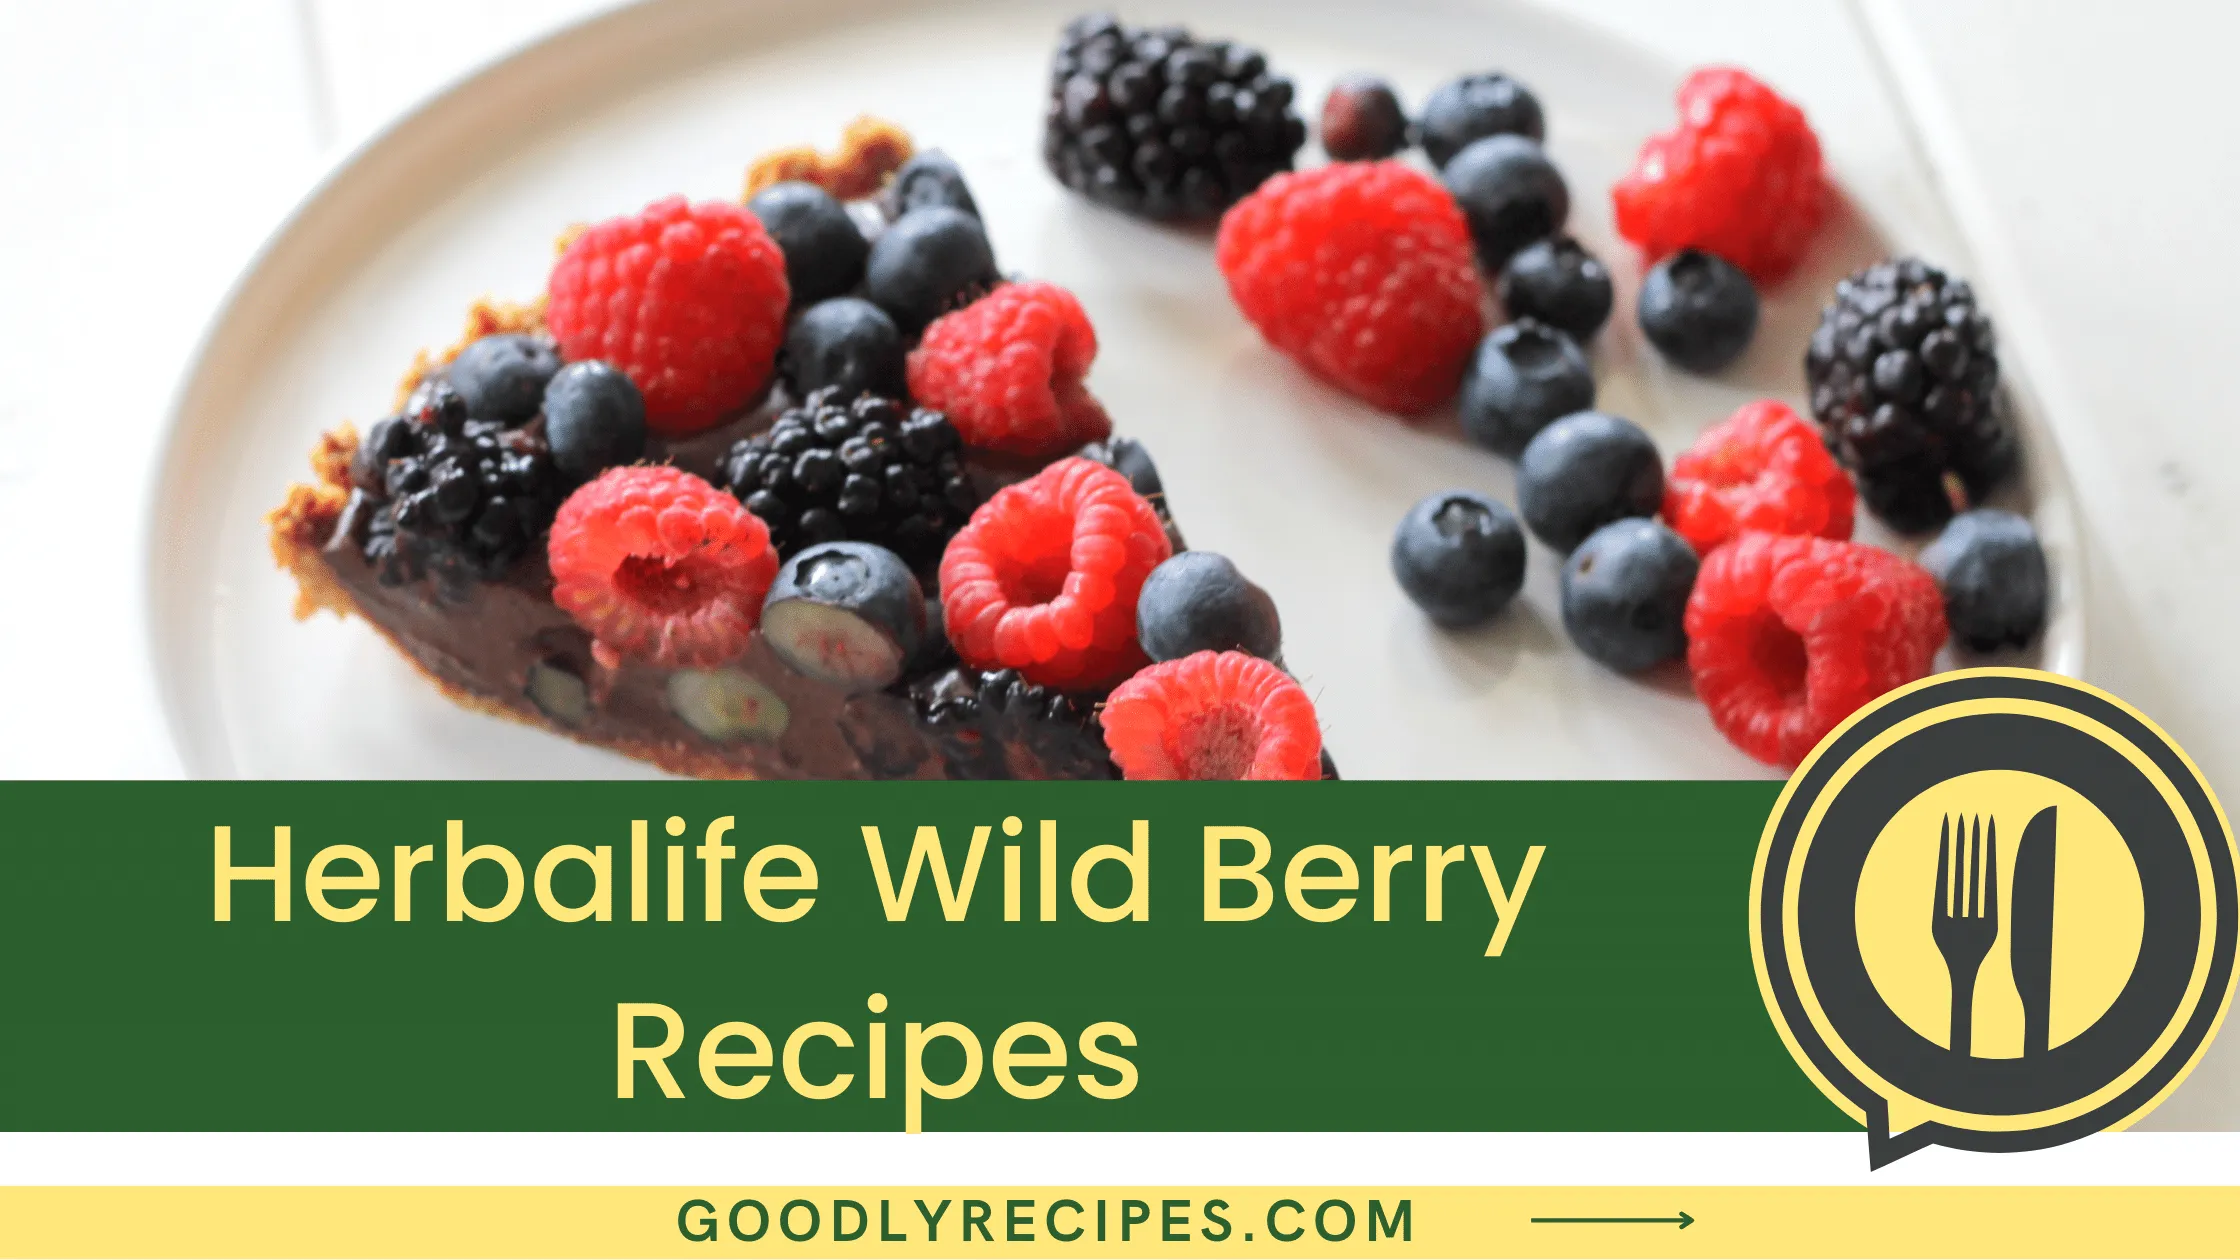 Herbalife Wild Berry Recipes - For Food Lovers